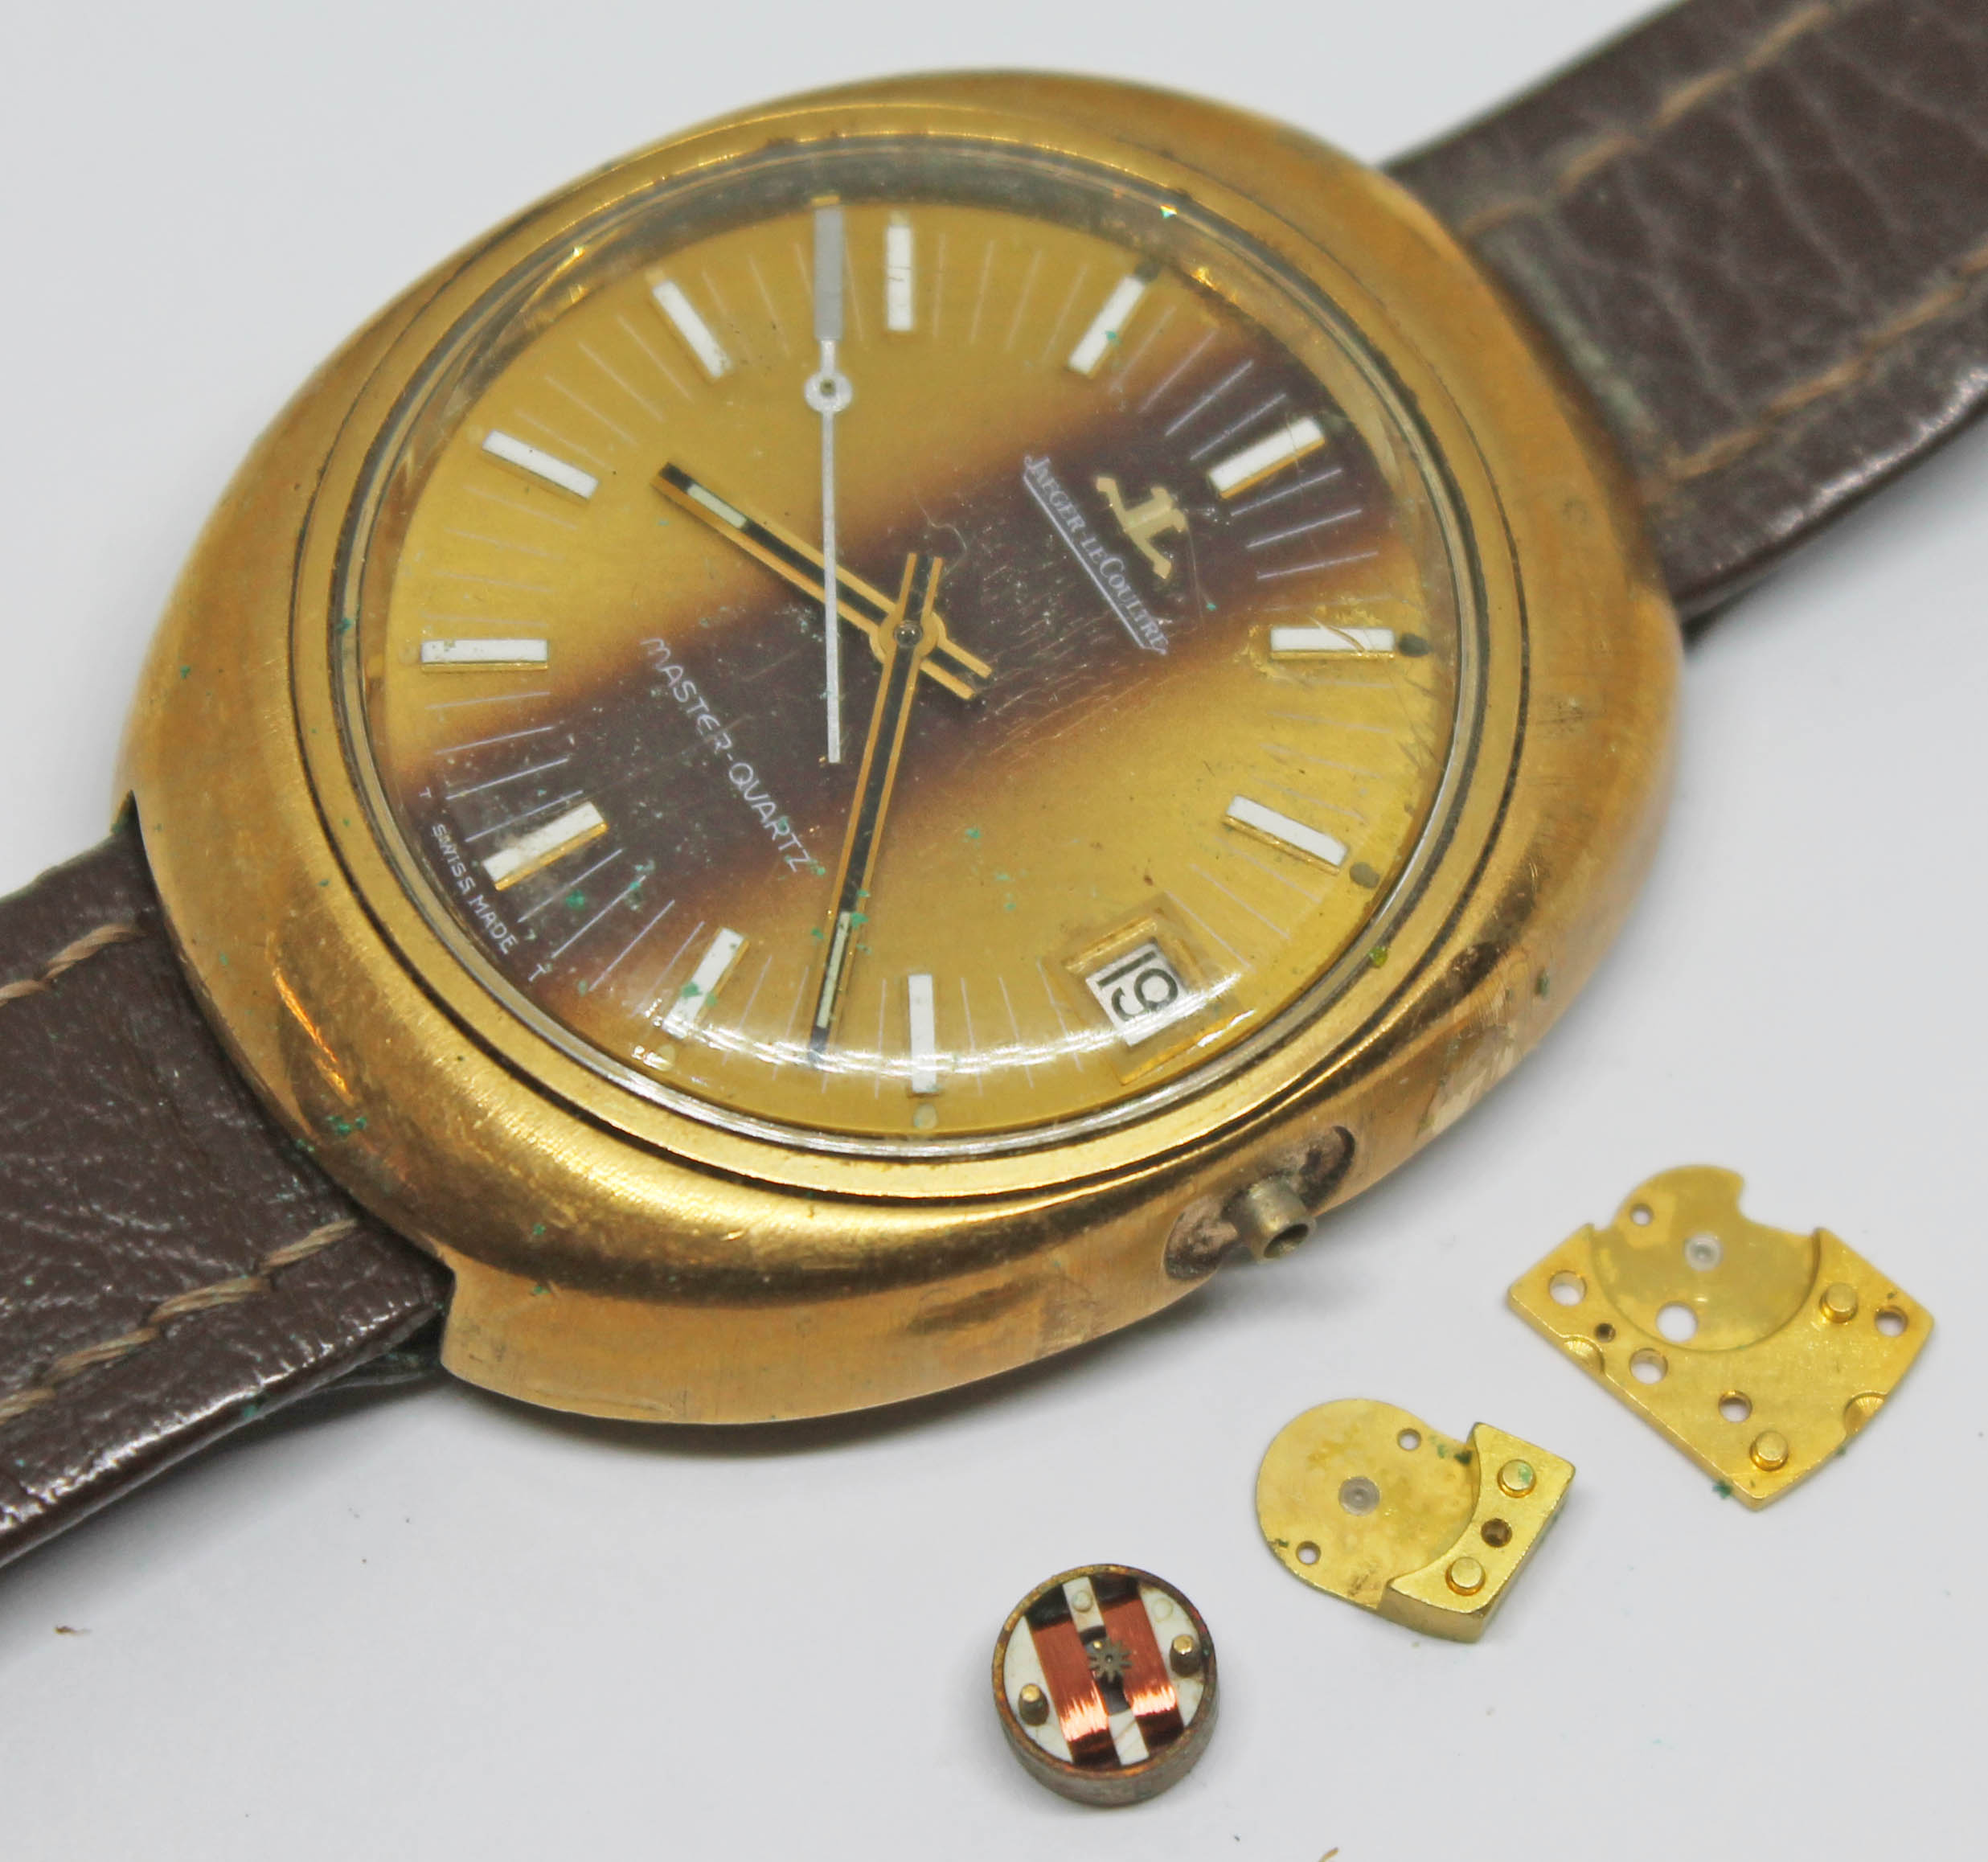 A vintage gold plated Jaeger-LeCoultre Master - Quartz wristwatch reference 23301-51, with gold